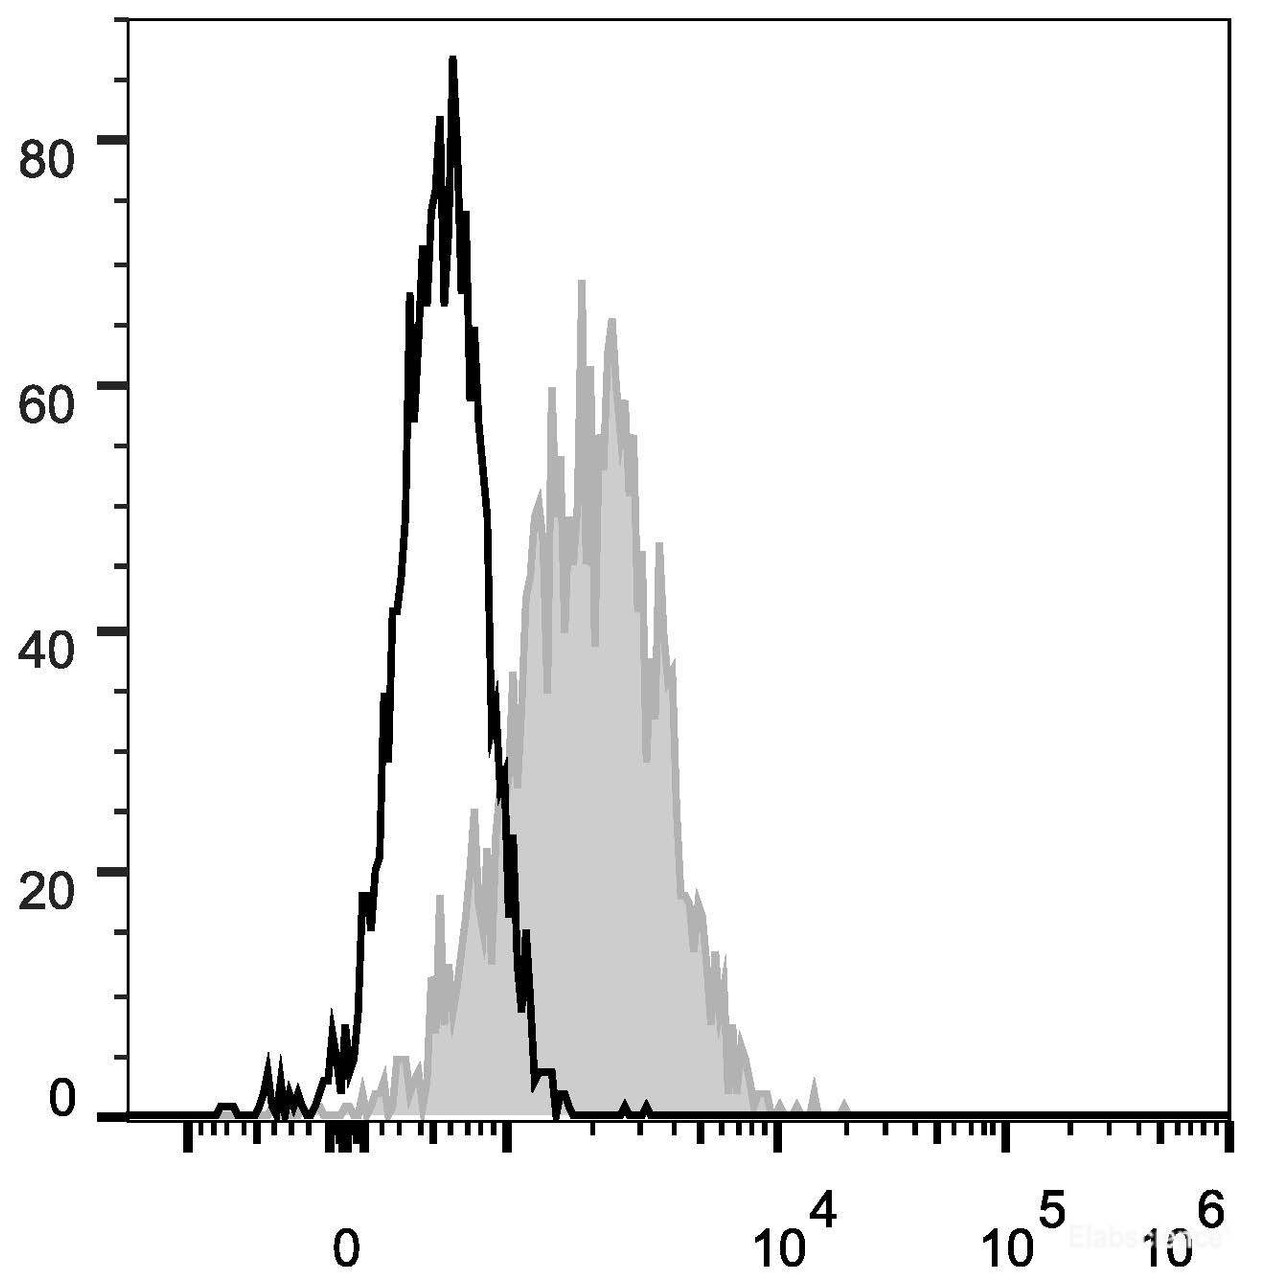 Human peripheral blood lymphocytes are stained with Anti-Human CD54 Monoclonal Antibody(FITC Conjugated)(filled gray histogram). Unstained lymphocytes (empty black histogram) are used as control.